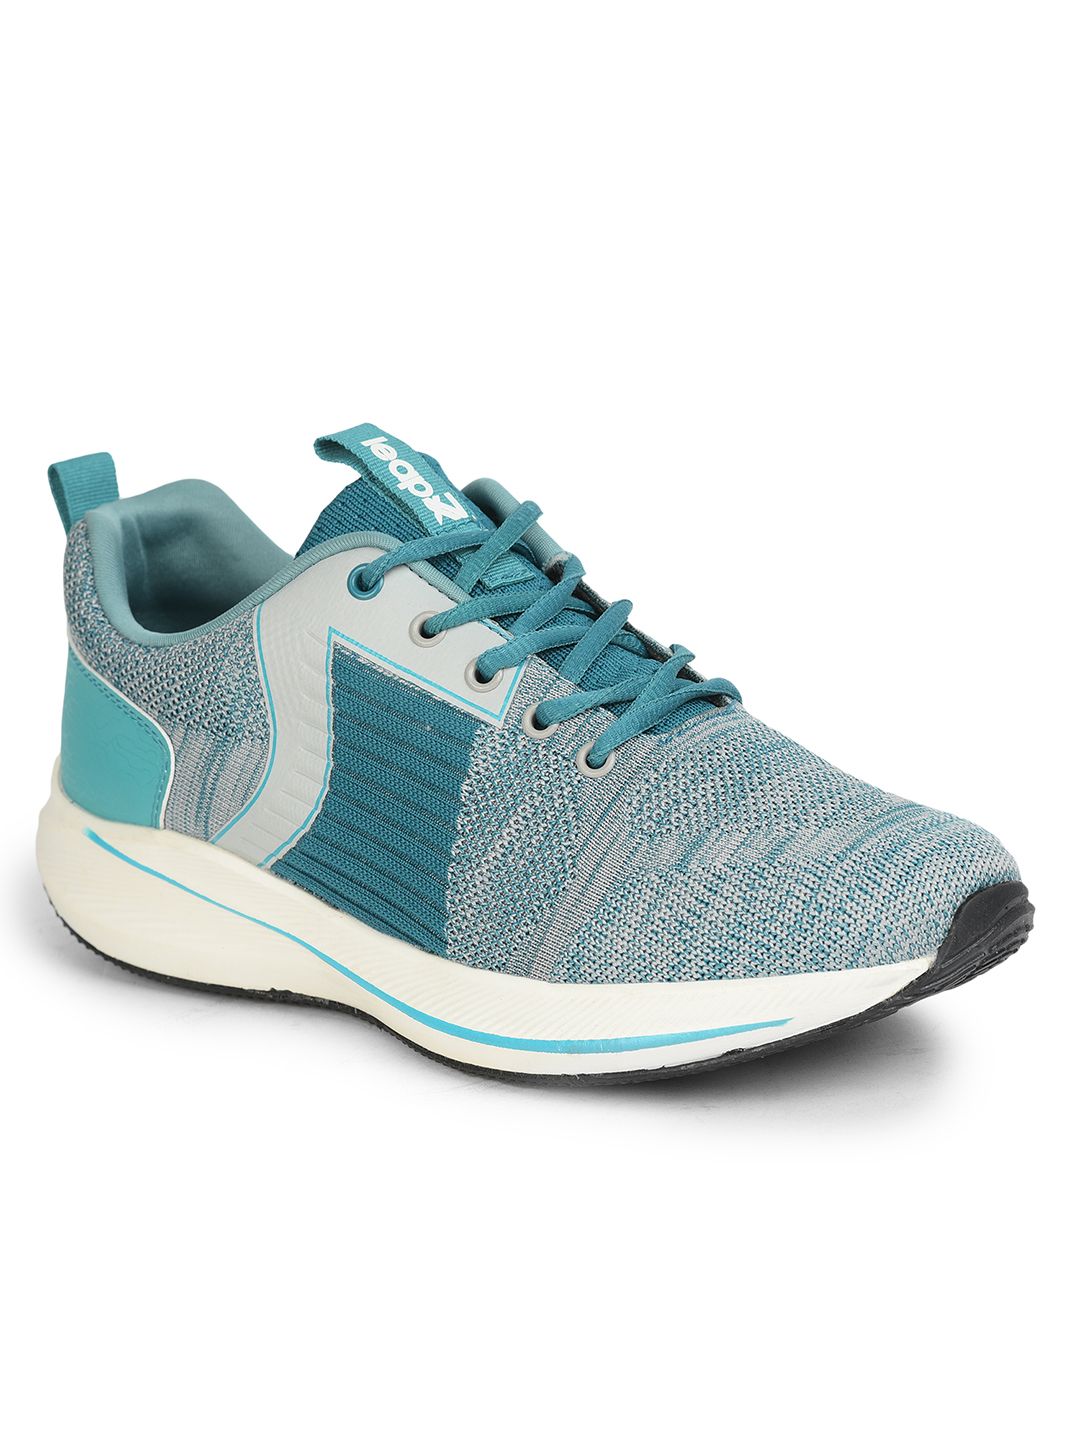 LEAP7X By Liberty Sports Shoes For Women (6168003129) | Book Bargain Buy